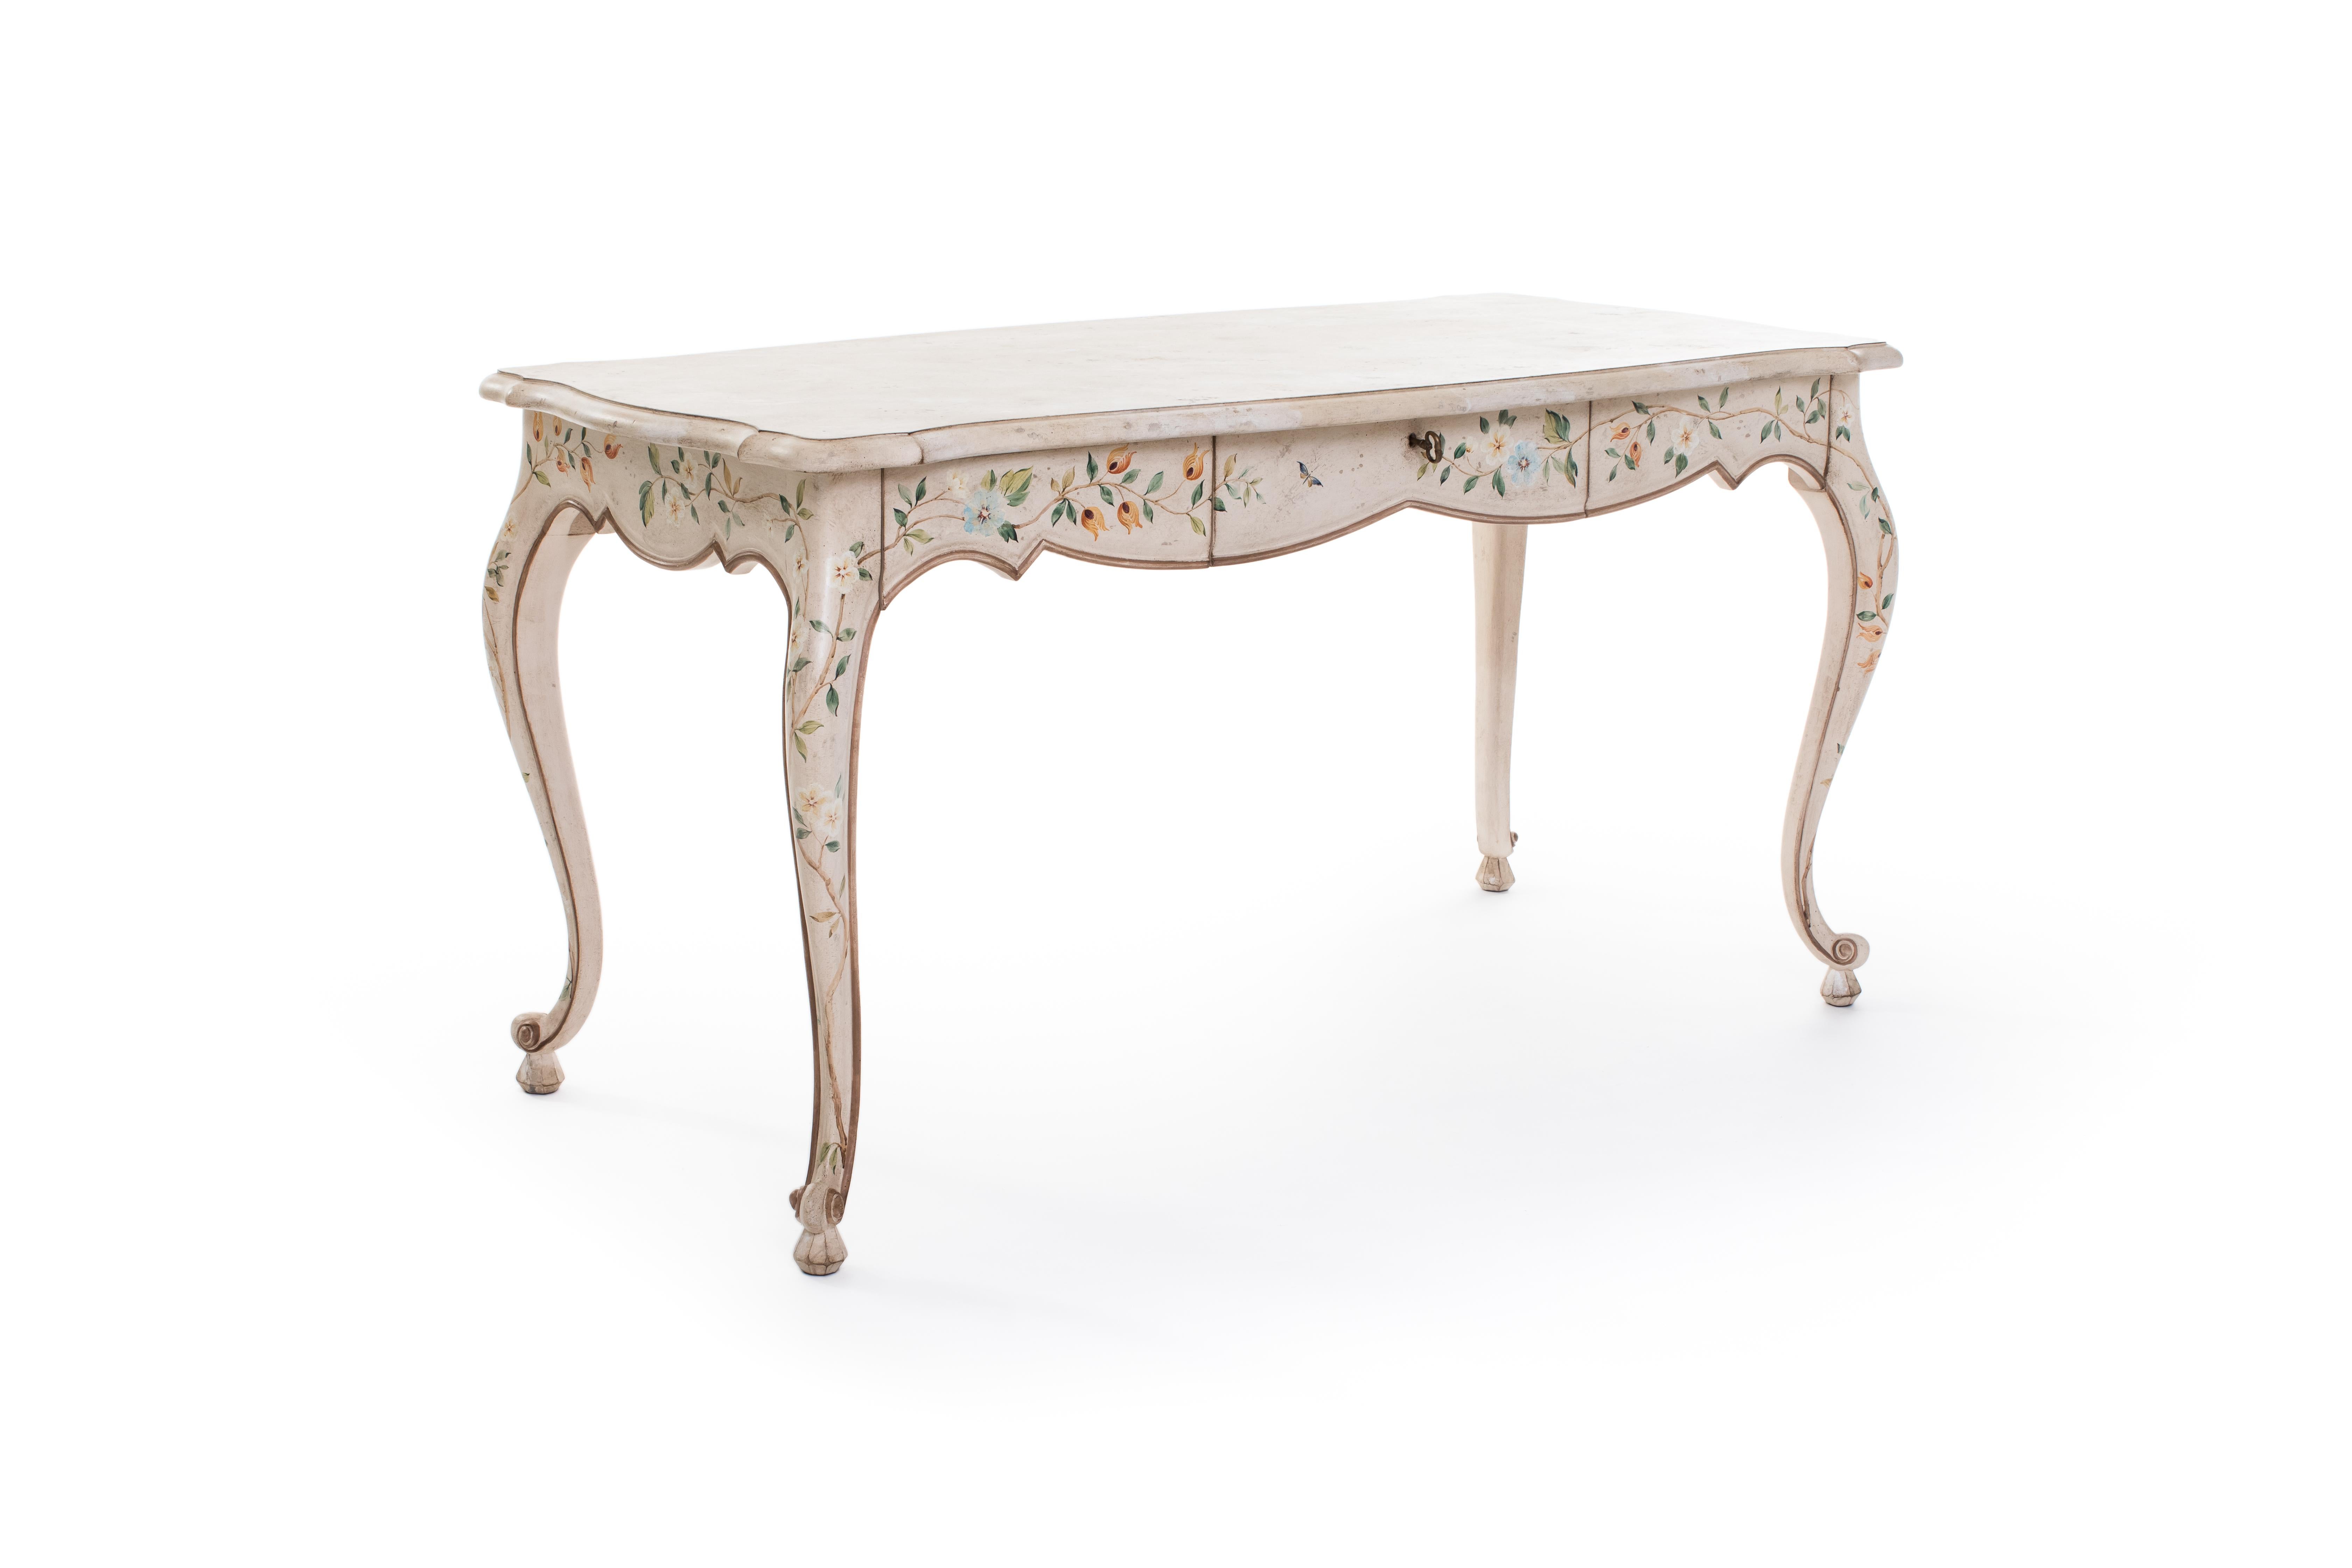 From our Hand-Painted Furniture Collection, we are pleased to introduce you to our ivory stra table with hand-painted little flowers decors.
This beautiful creation can be used both as desk table and vanity, adding a triple mirror.
The little